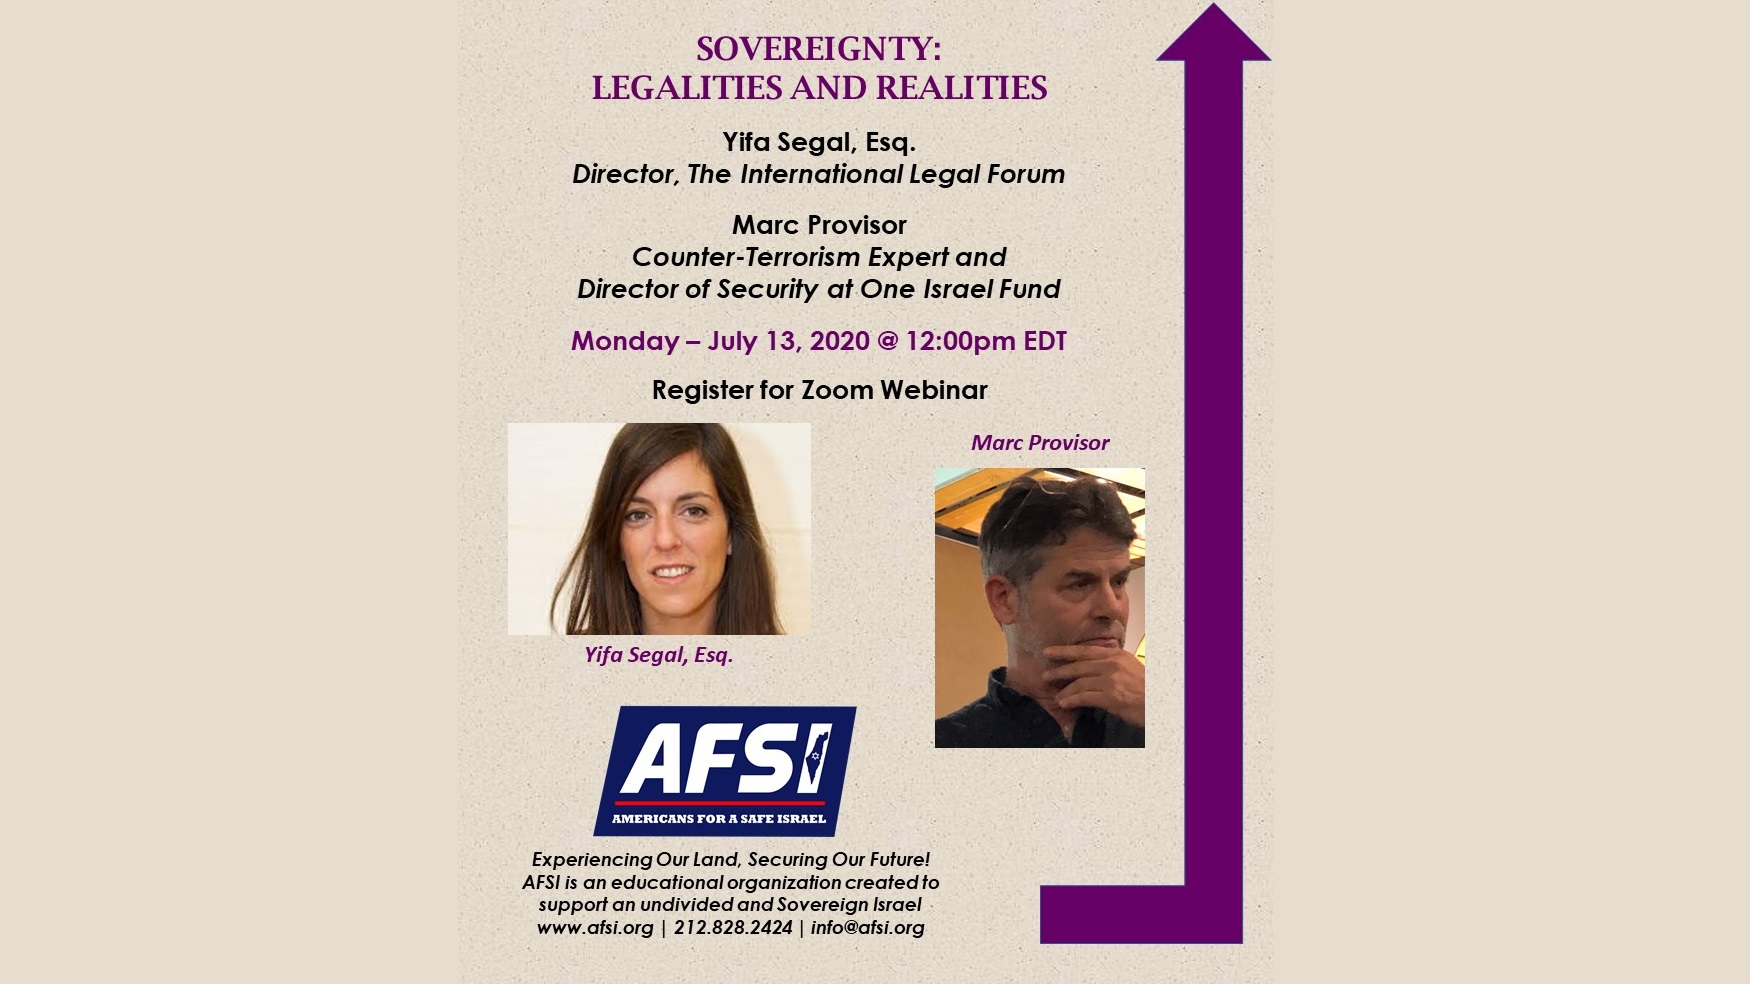 Sovereignty: Legalities and Realities